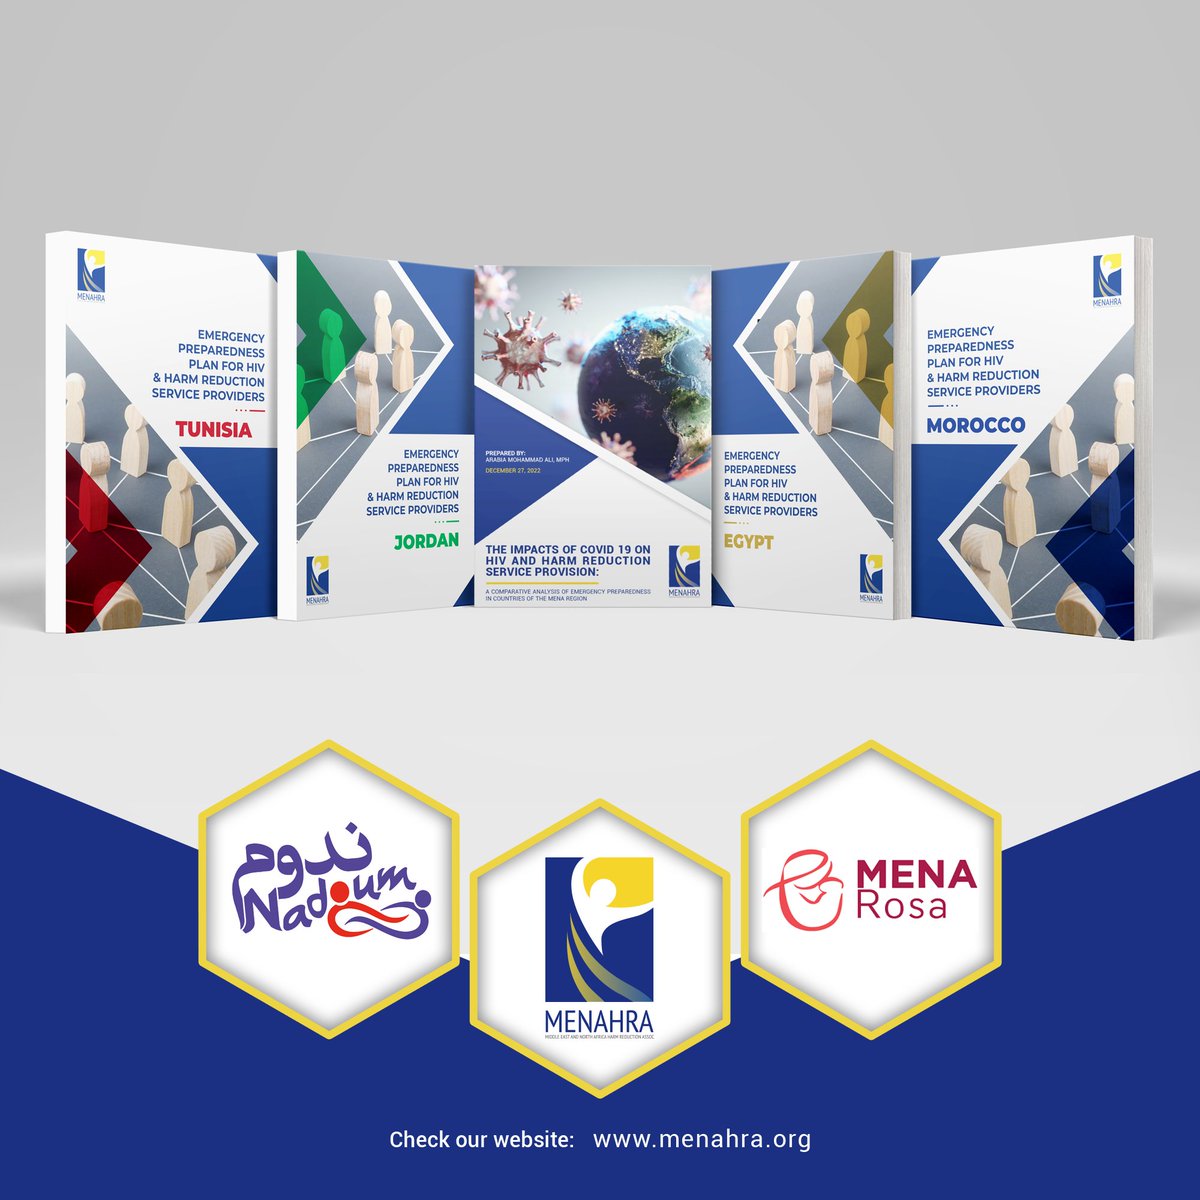 Addressing the Challenges of HIV and COVID-19 in the MENA Region: The Efforts of @MENARosa2 and MENAHRA.
🔹Know more: bit.ly/3IsiOVb

#WLHIV #PWUD #PLHIV #harmreduction #Egypt 
 #Jordan #EmergencyPlan #resilience #HIVServices #PublicHealth